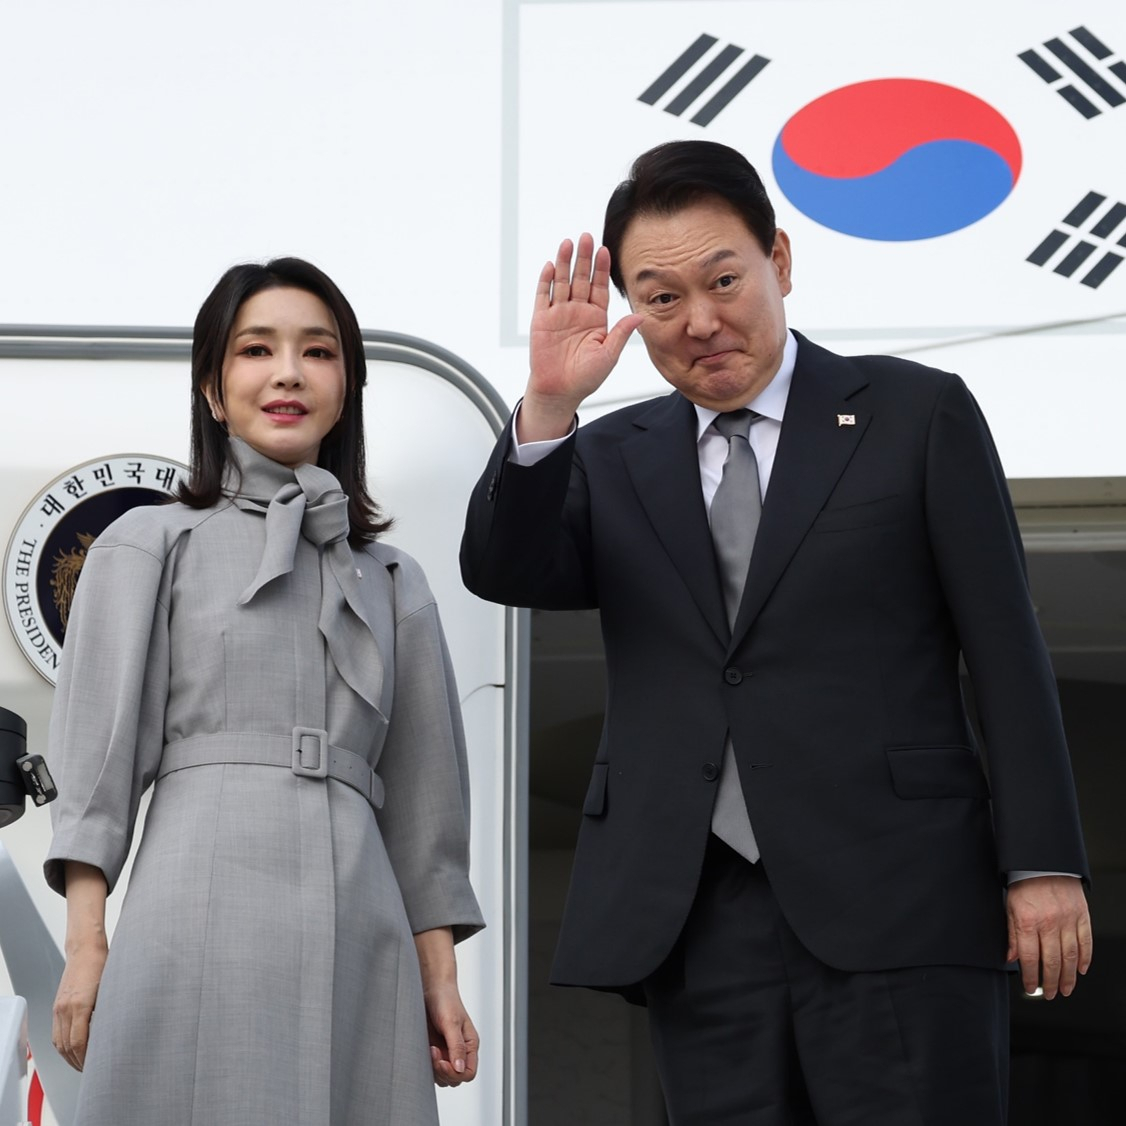 President Yoon Suk-yeol and first lady Kim Keon-hee board the presidential plane at London Stansted Airport on Monday to depart for New York. (Yonhap)